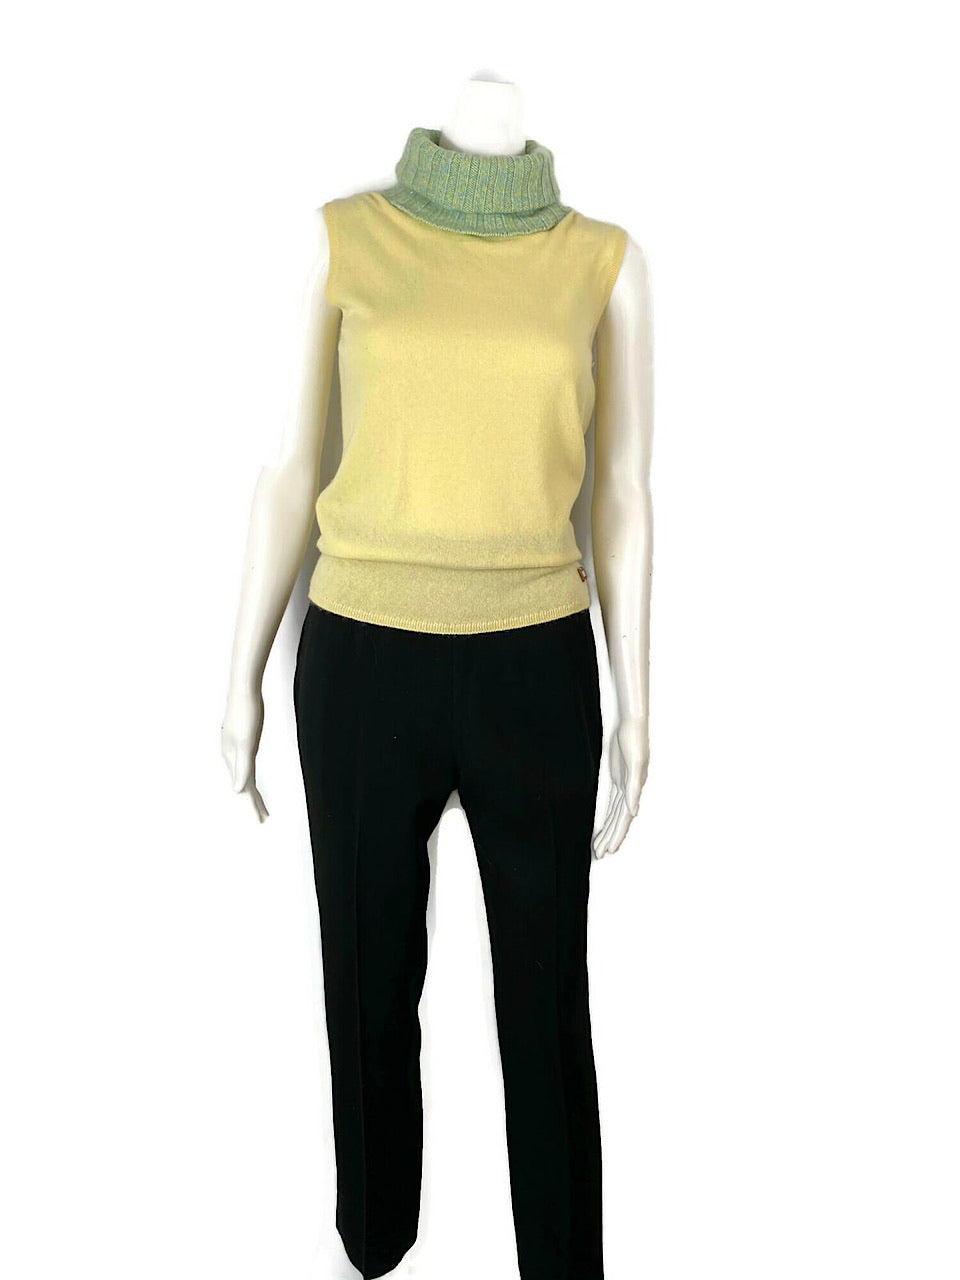 NWT Chanel 01A 2001 Fall green yellow turtleneck sweater blouse FR